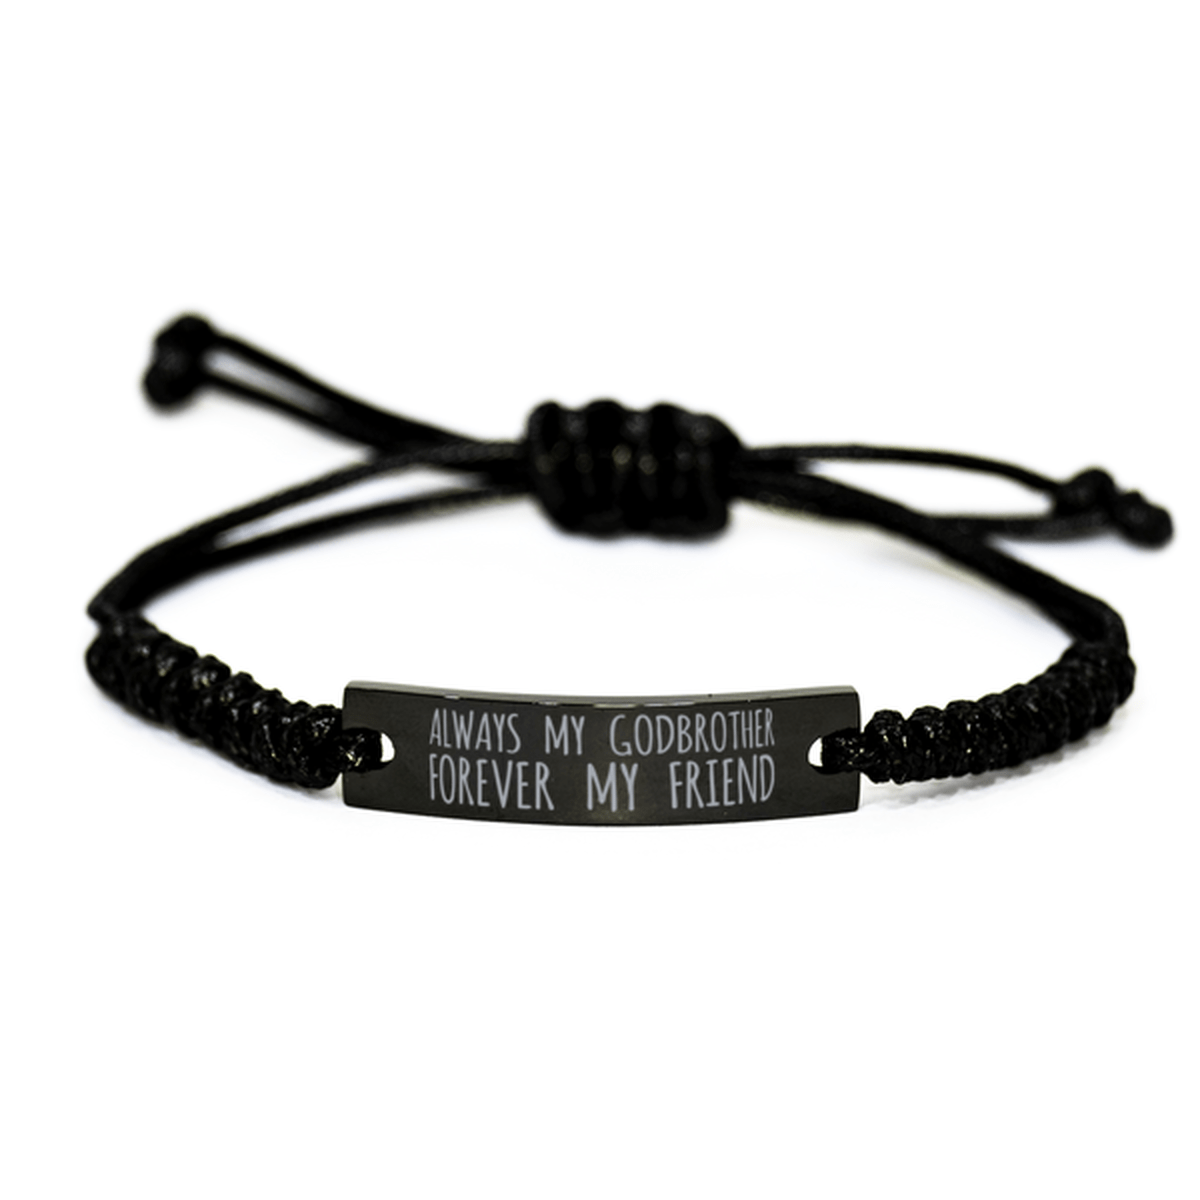 Inspirational Godbrother Black Rope Bracelet, Always My Godbrother Forever My Friend, Best Birthday Gifts For Family